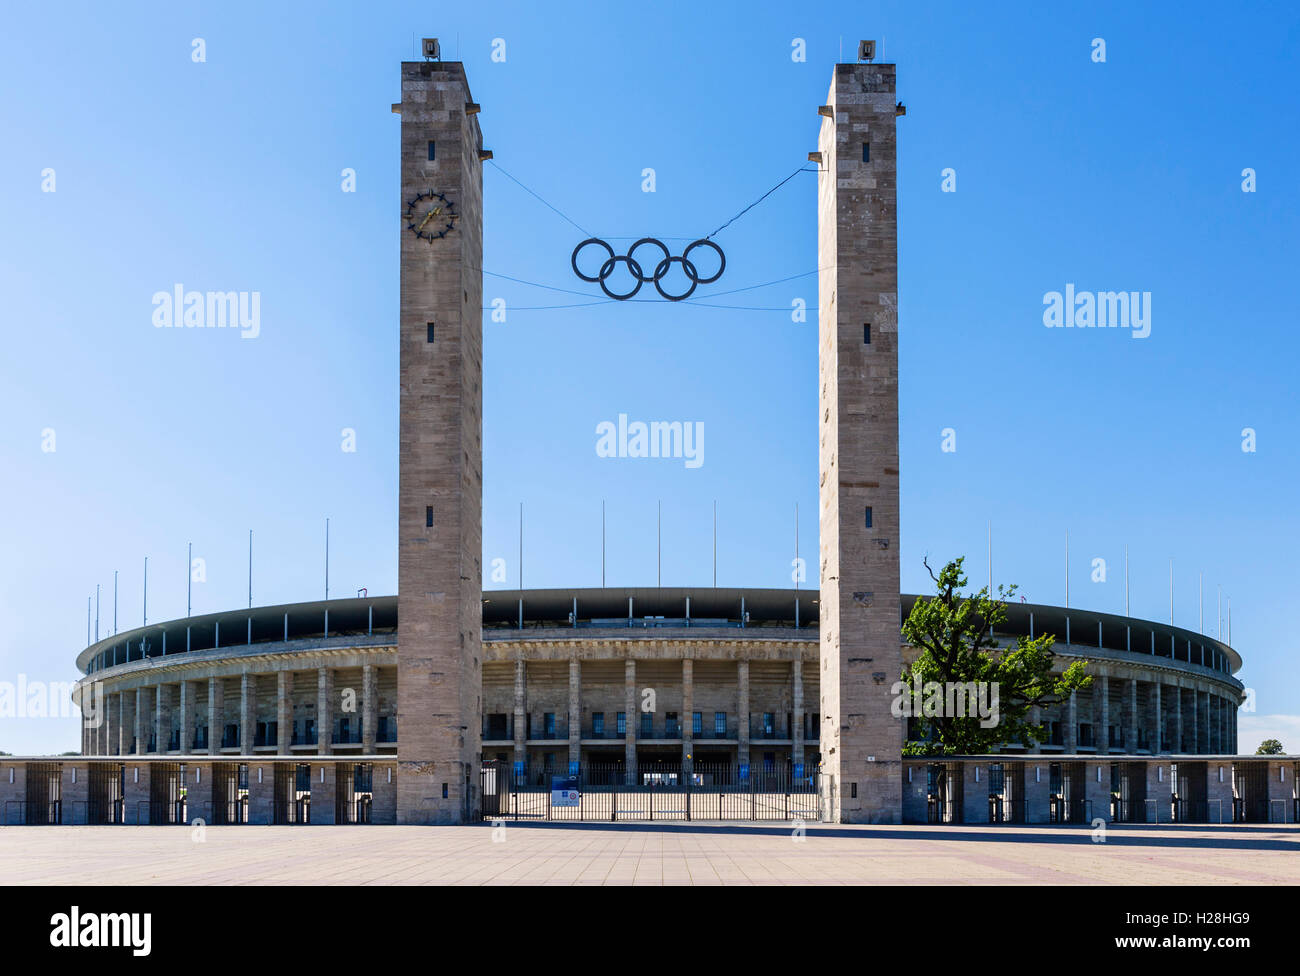 Olympiastadion (Olympic Stadium), built for the 1936 Olympic Games, Berlin, Germany Stock Photo